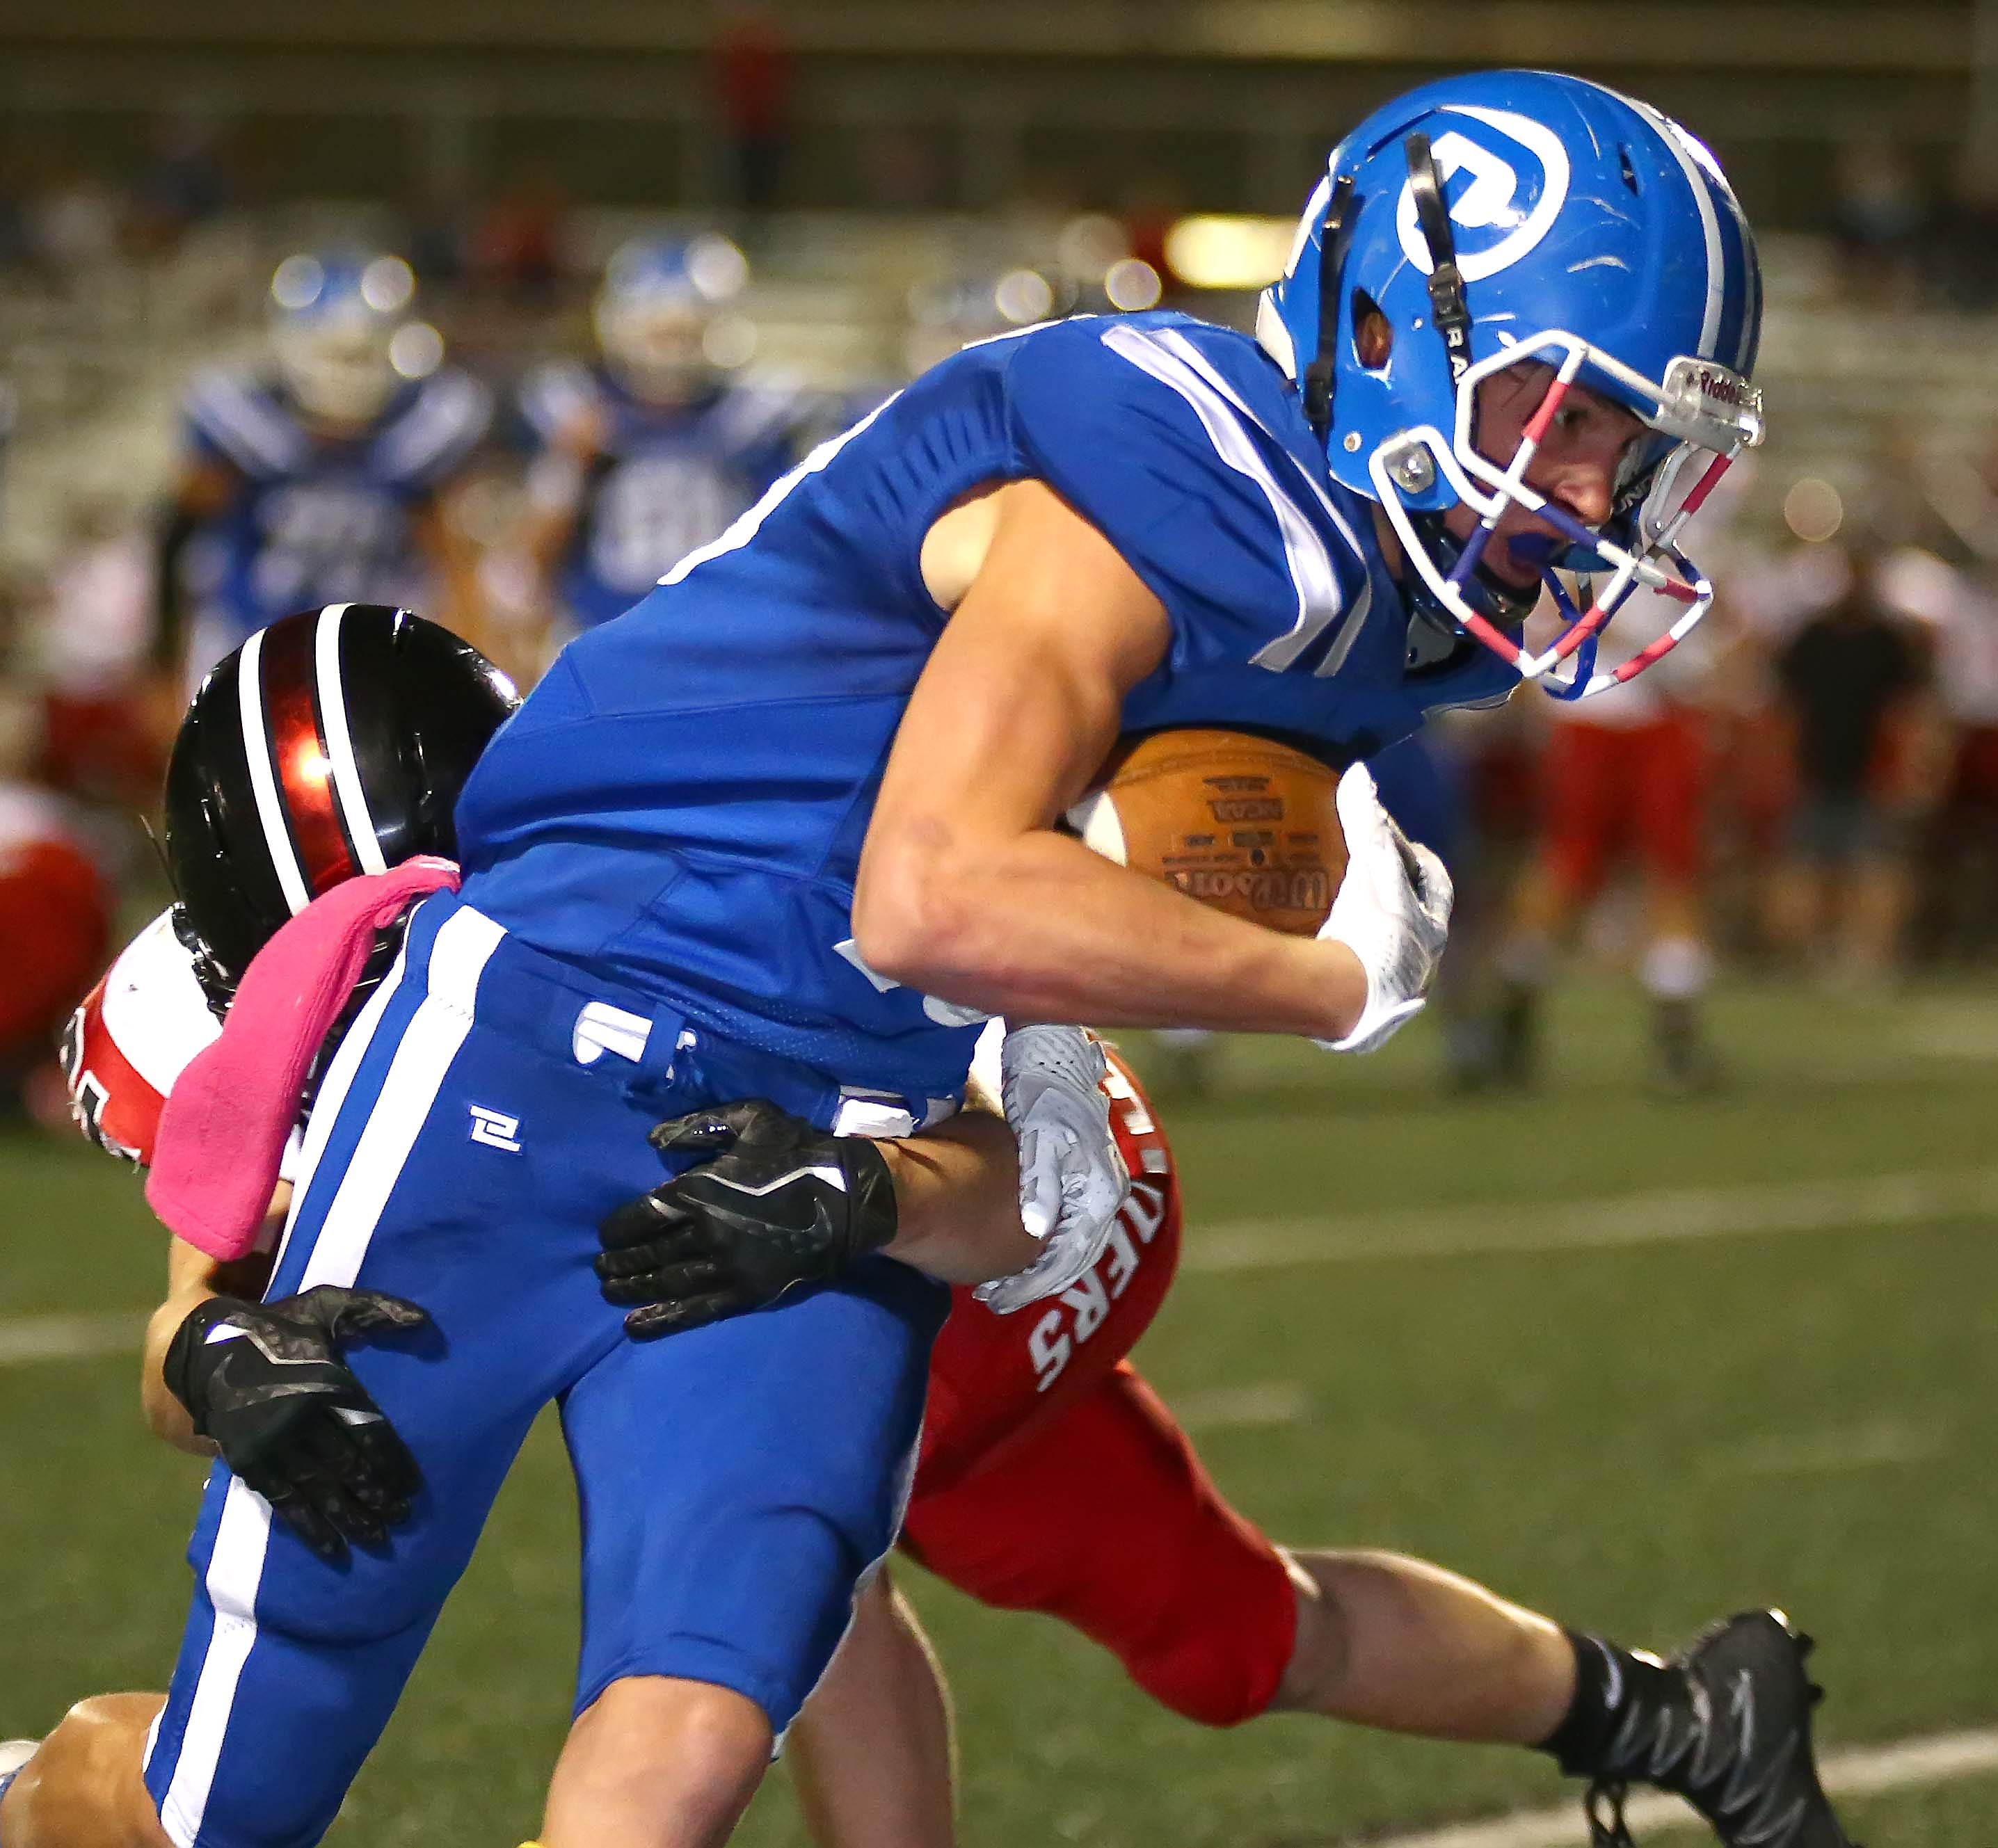 Dixie defense saves the day in homely win over Park City – St George News